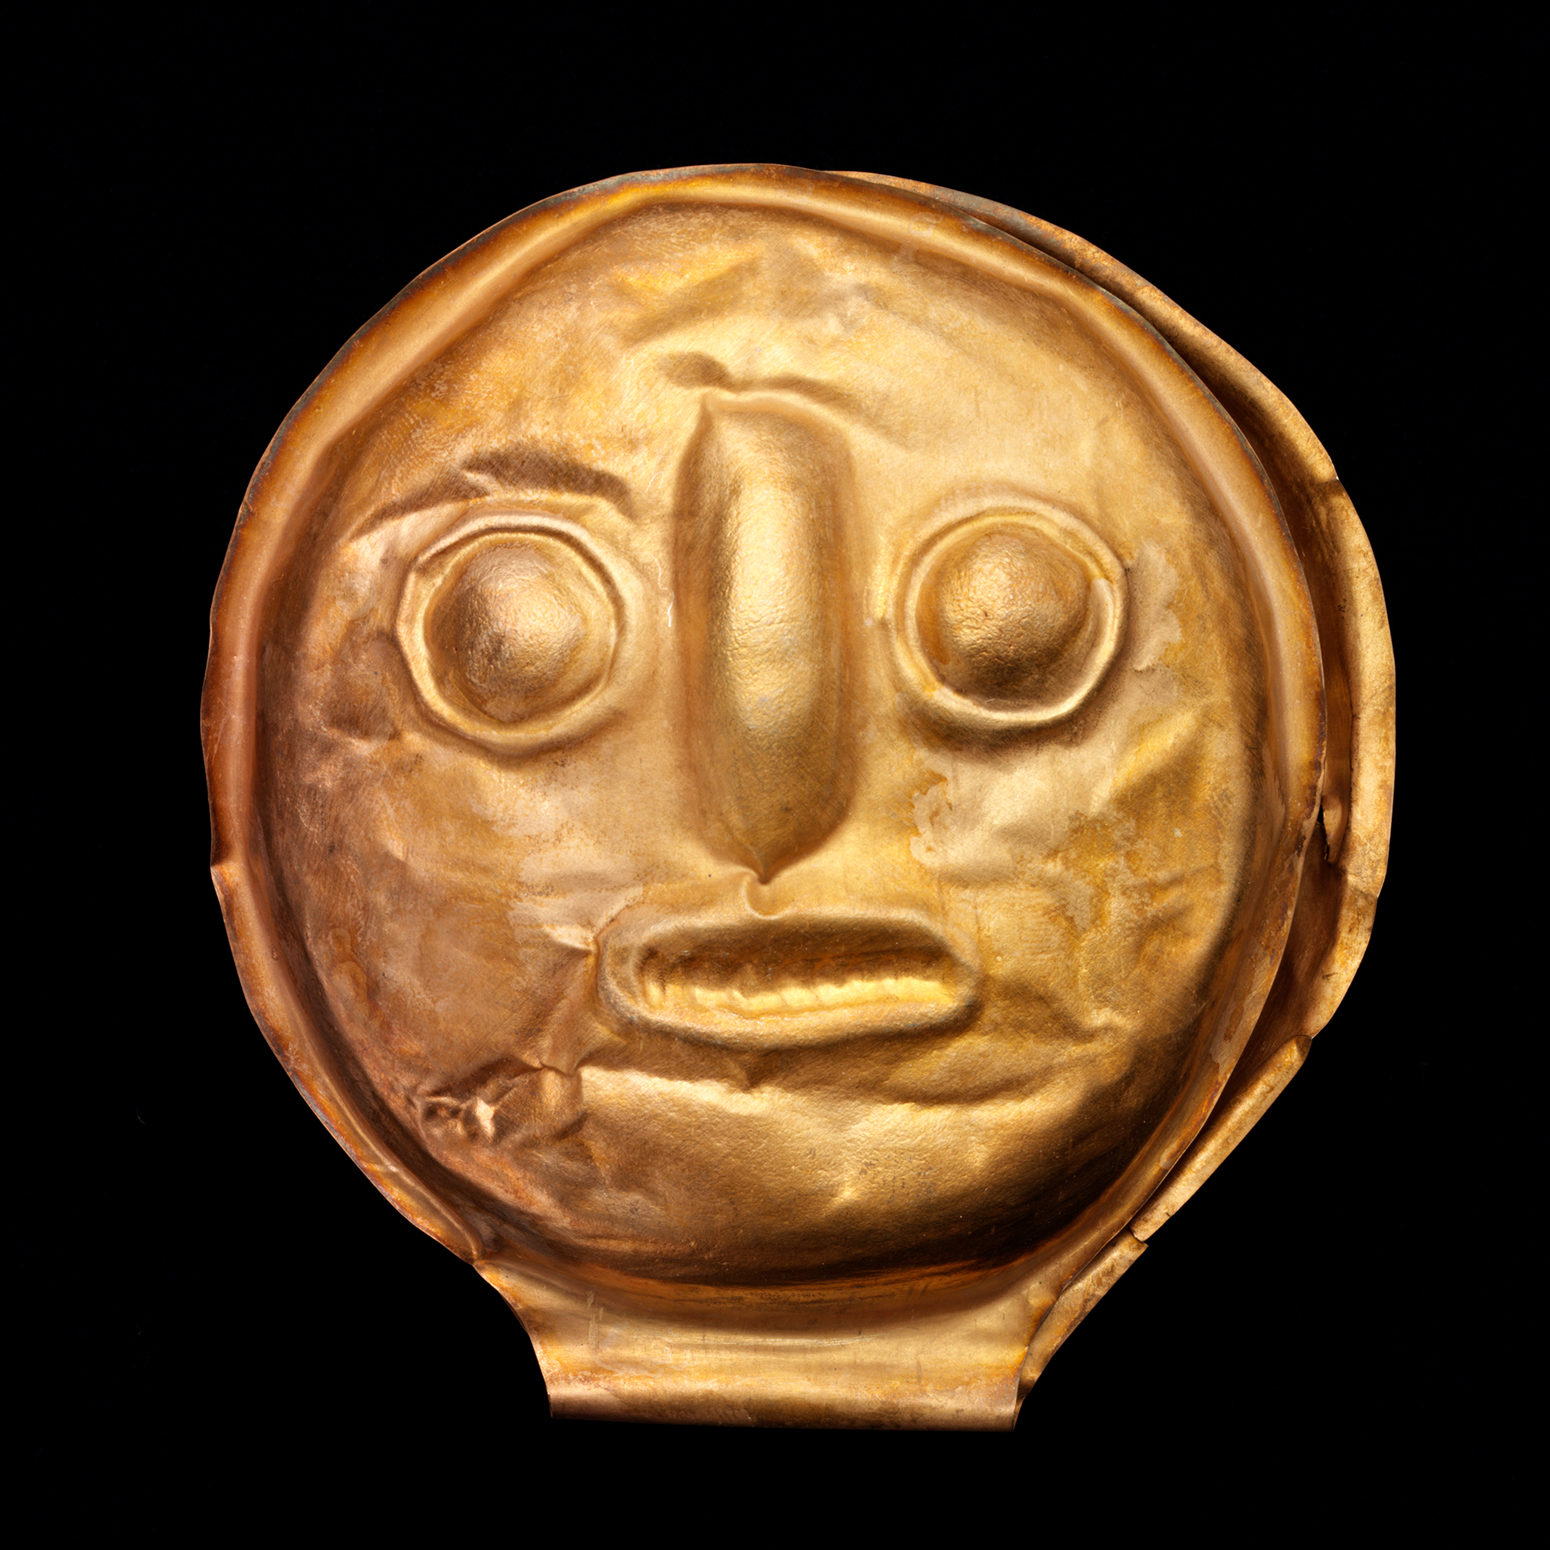 A simply rendered face on a gold circle